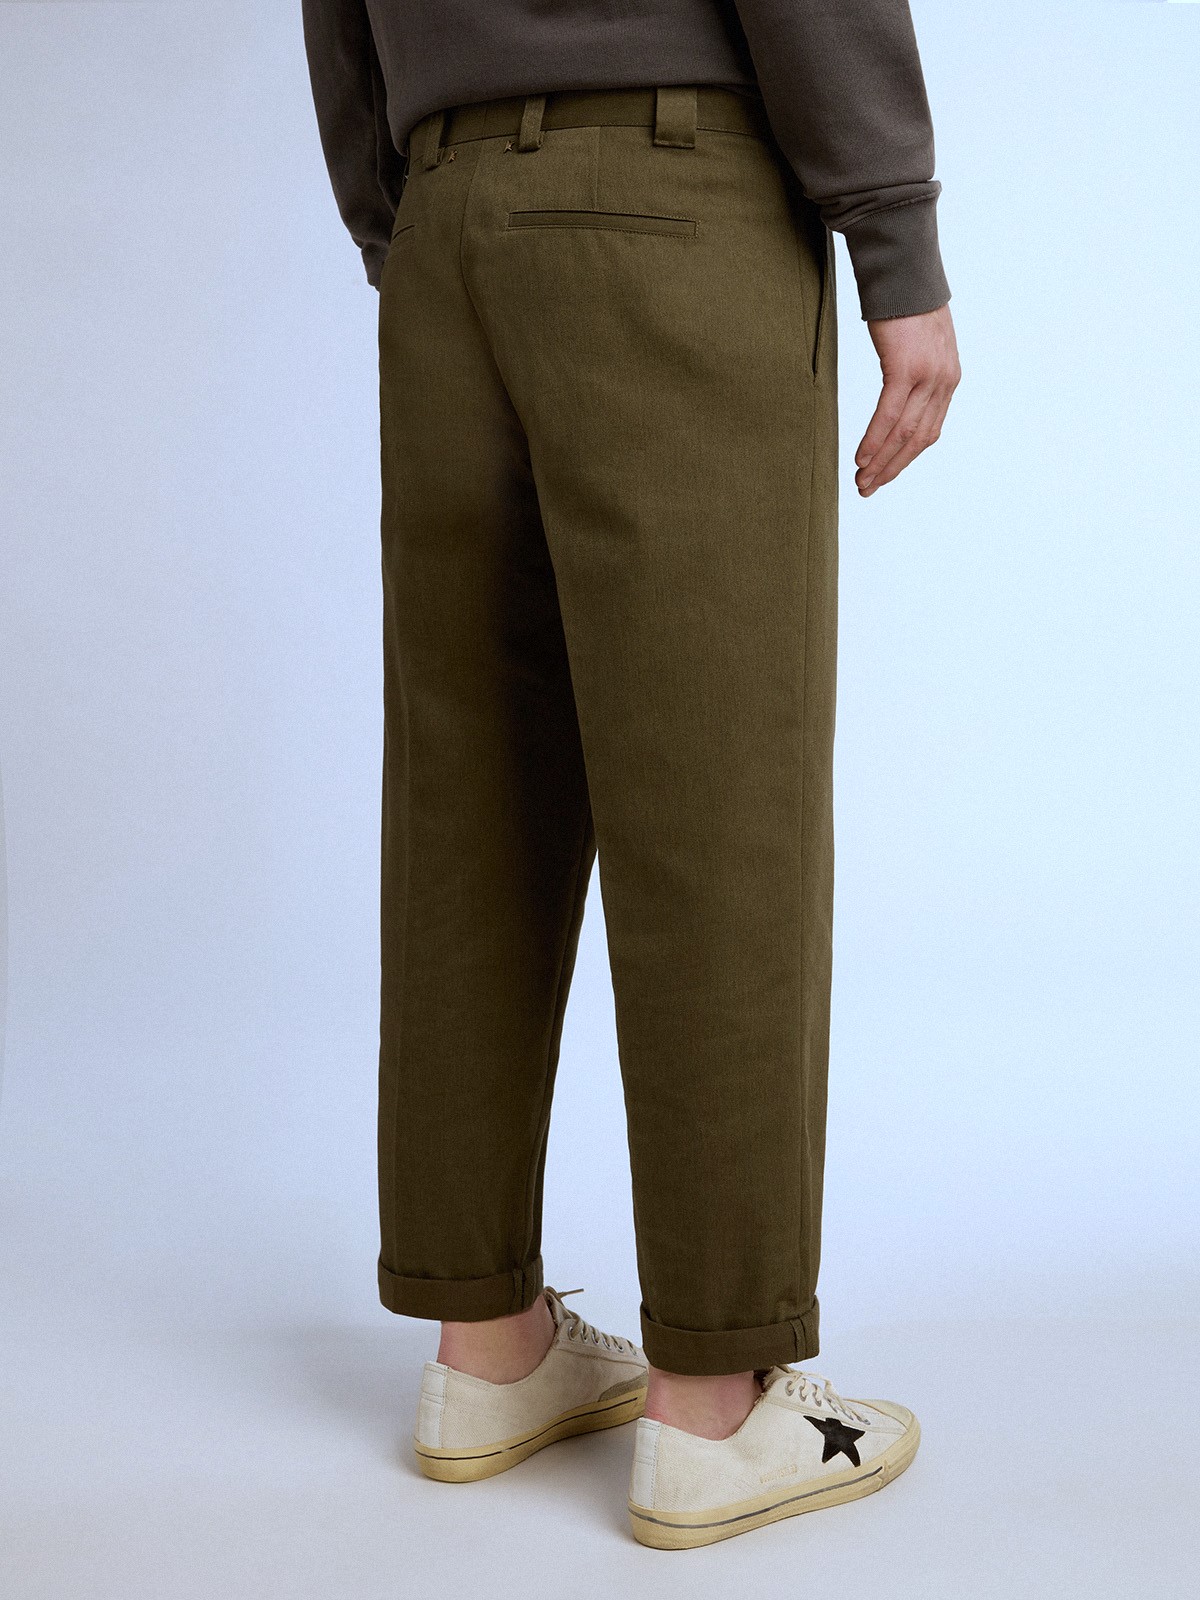 GOLDEN GOOSE Chino Skate Pants in Olive 52